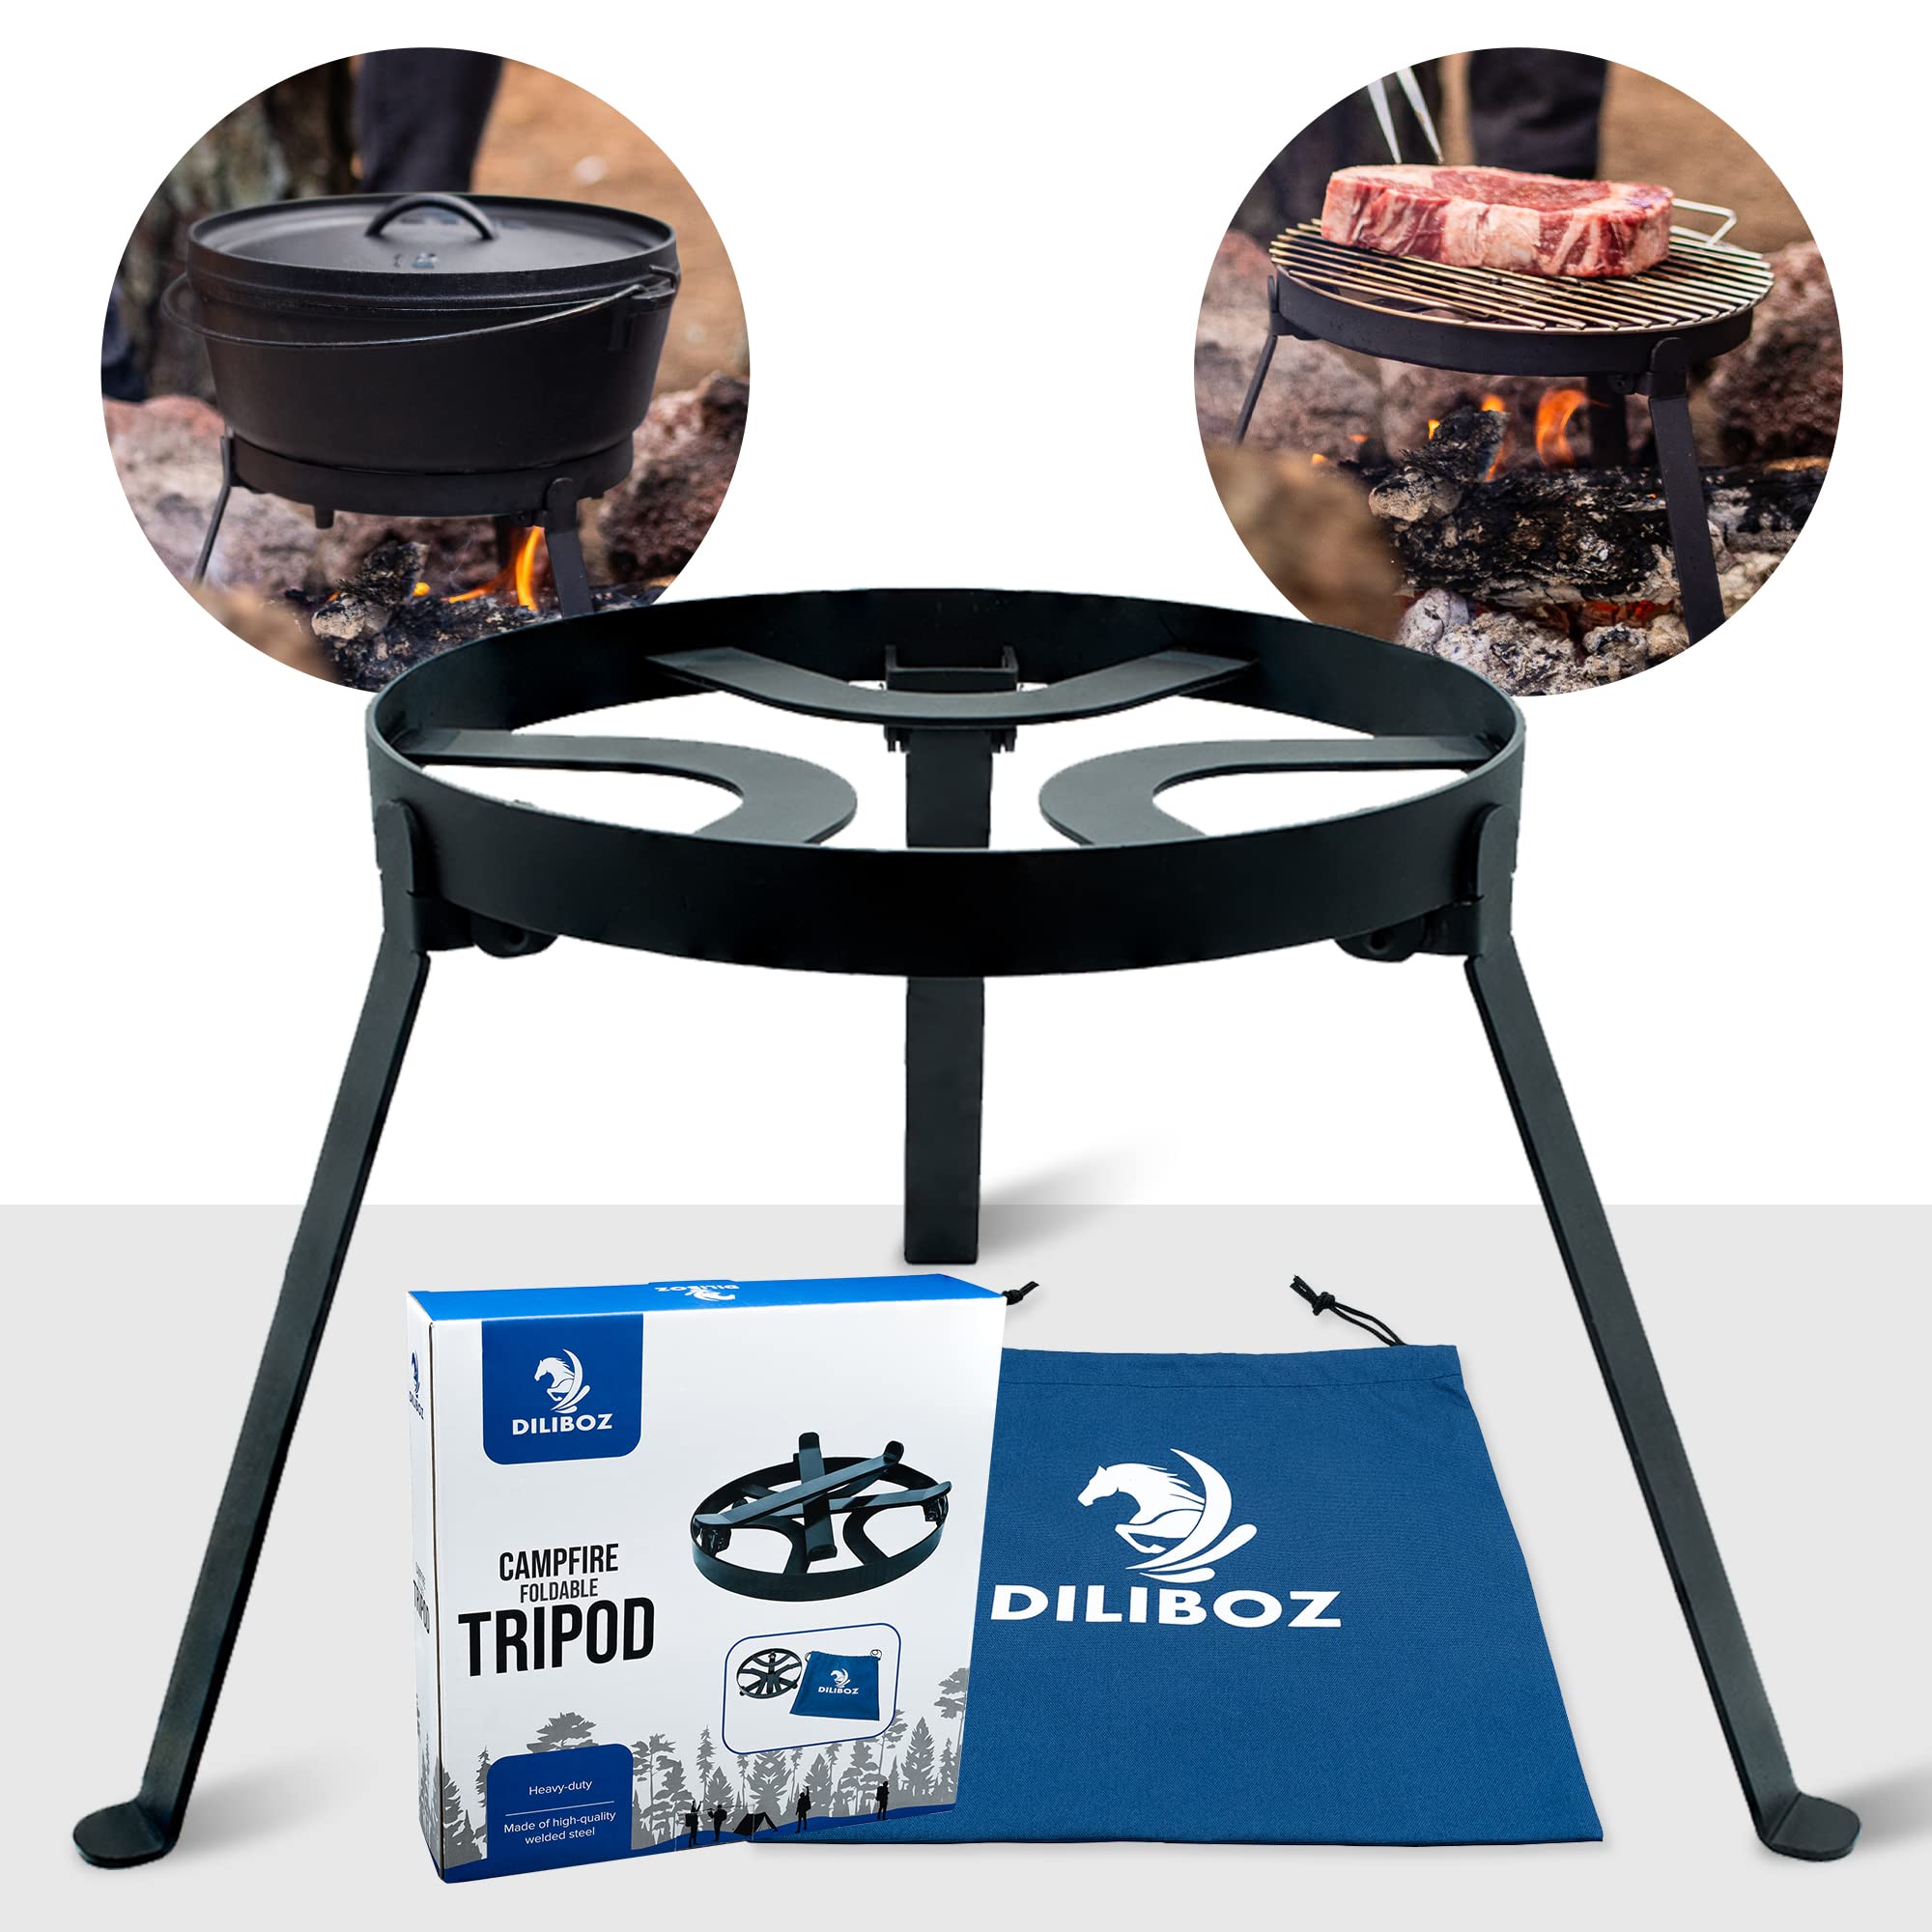 Diliboz Campfire Tripod for Dutch Oven - Camping Tripod for Cooking - Campfire Cooking Stand - Cooking Tripod - Open Fire Tripod Grill for Cooking in Cast Iron - Campfire Cooking